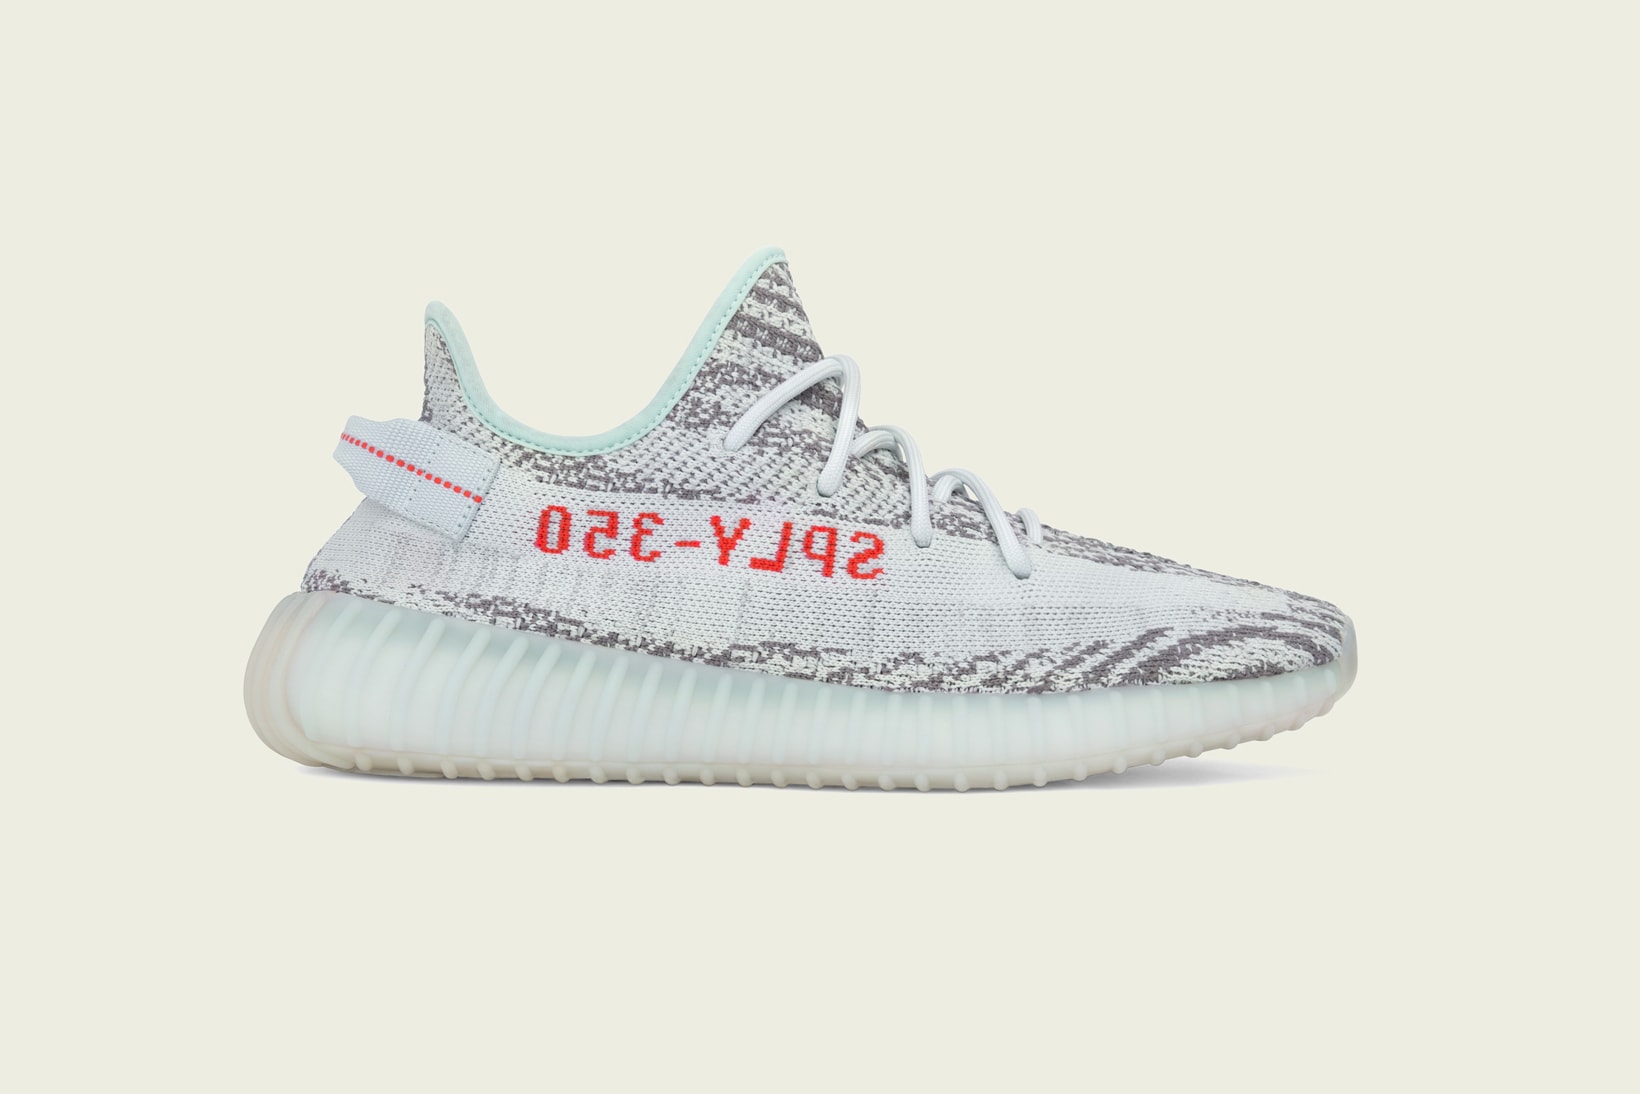 adidas Originals YEEZY BOOST 350 V2 Blue Tint Grey Three High Res Red Kanye West Sneakers Release Date Info Drops December 16 2017